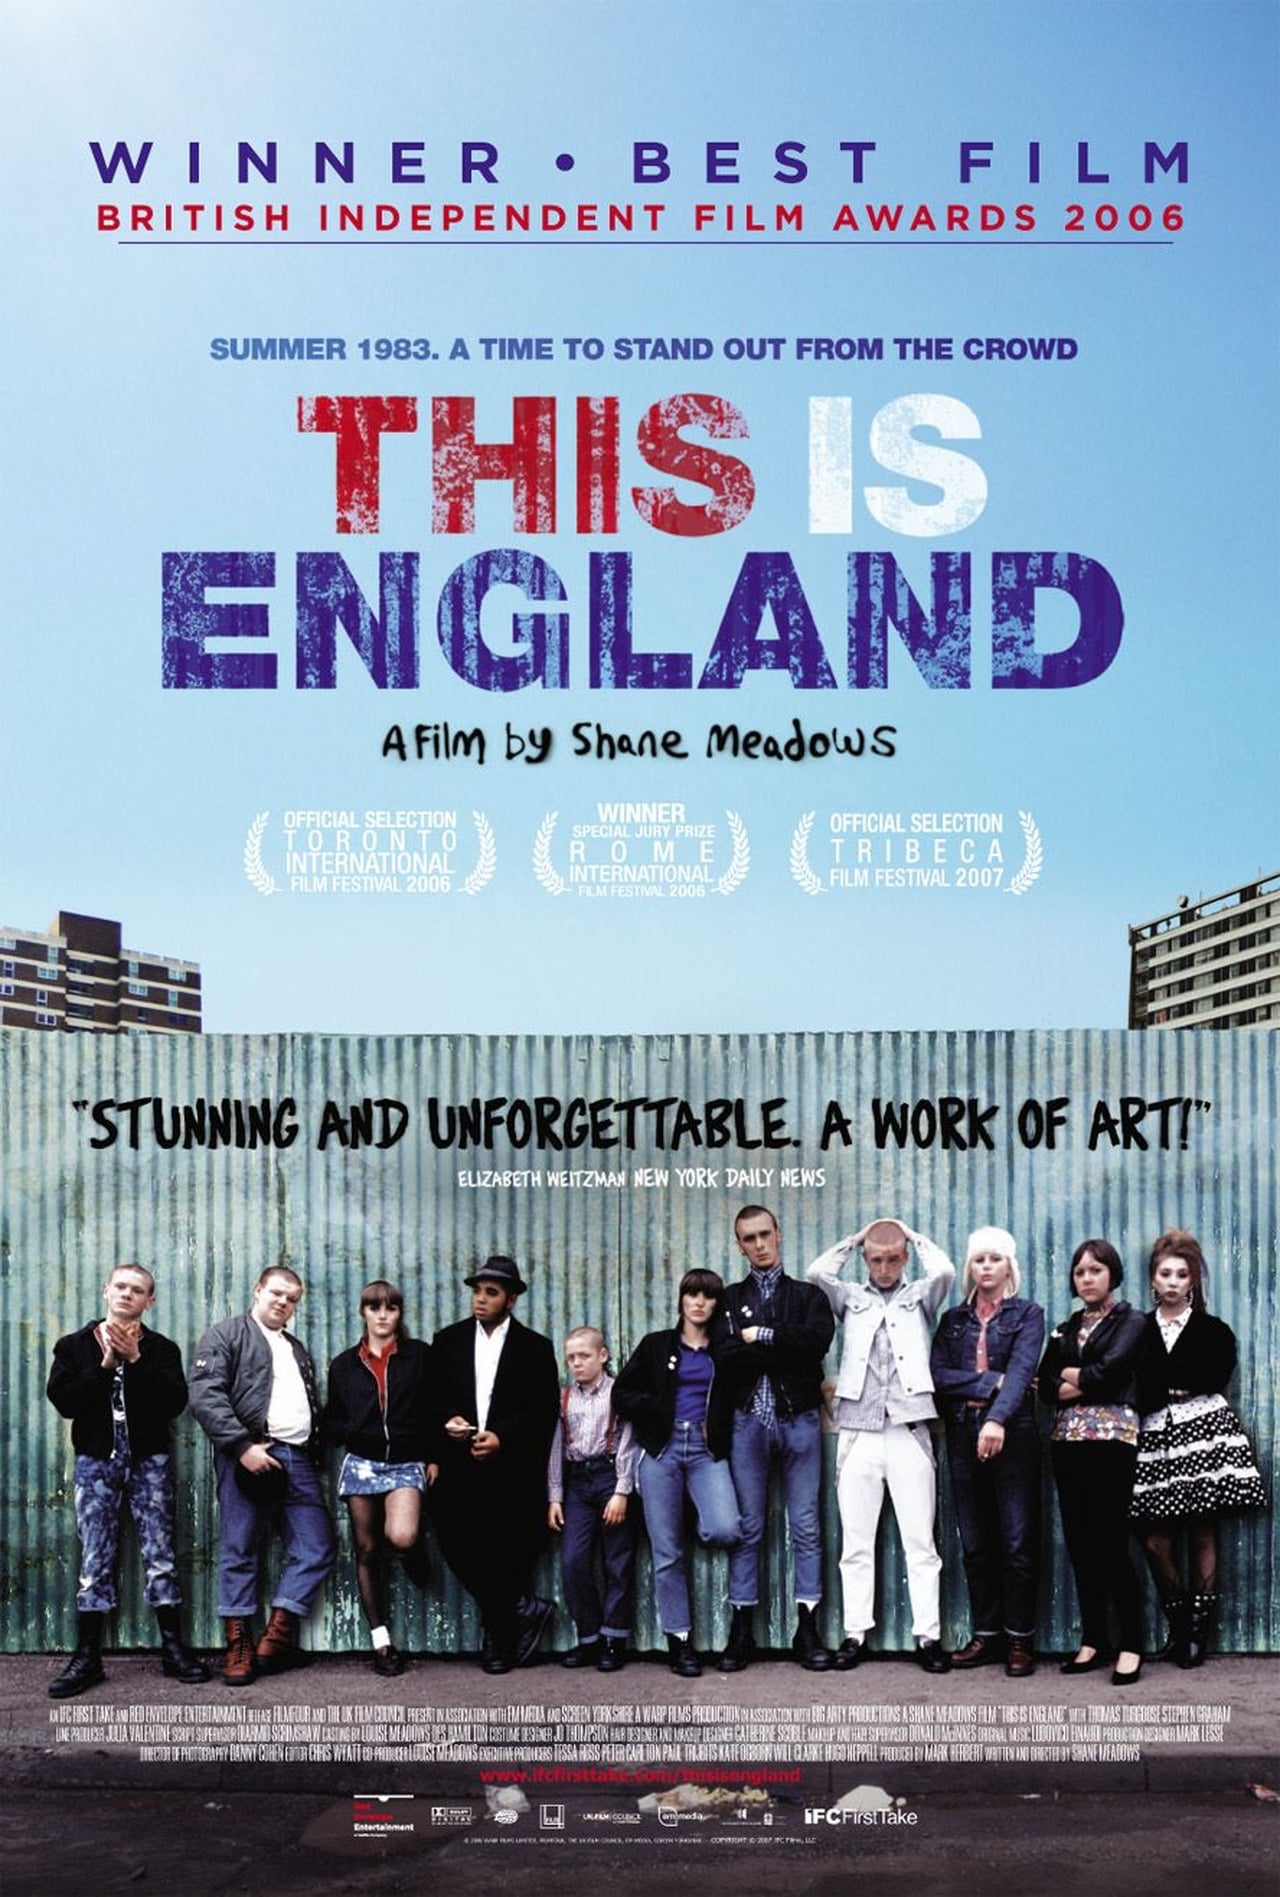 EN - This Is England (2006)